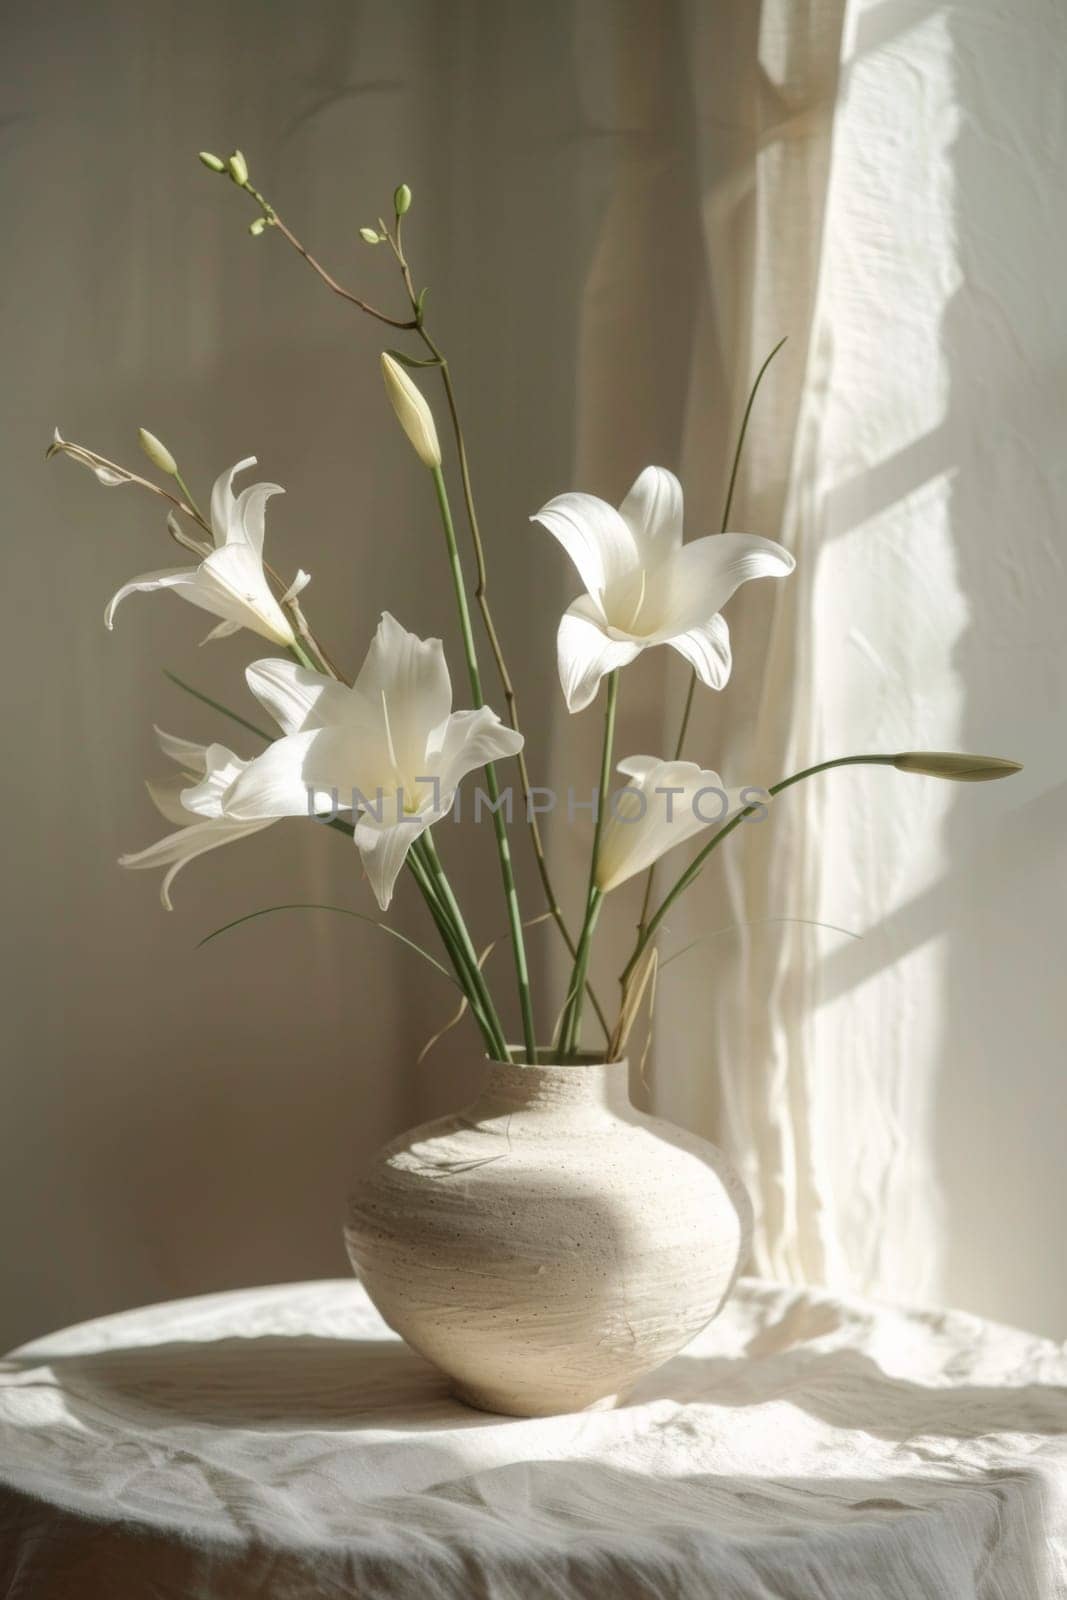 A vase with white flowers on a table in front of window